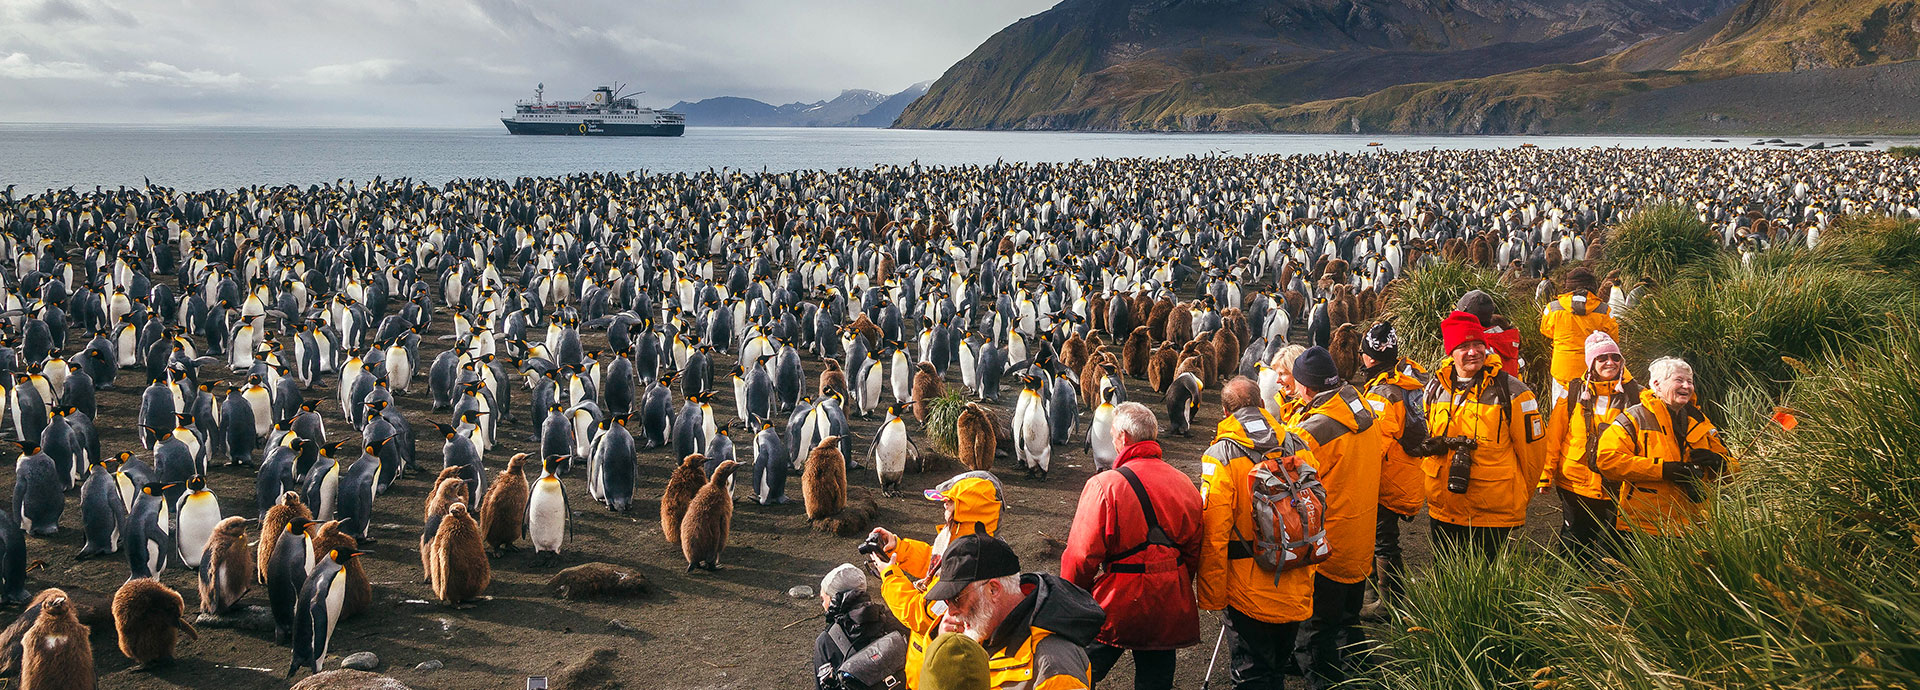 Walking among penguins in Antarctica with Quark Expeditions